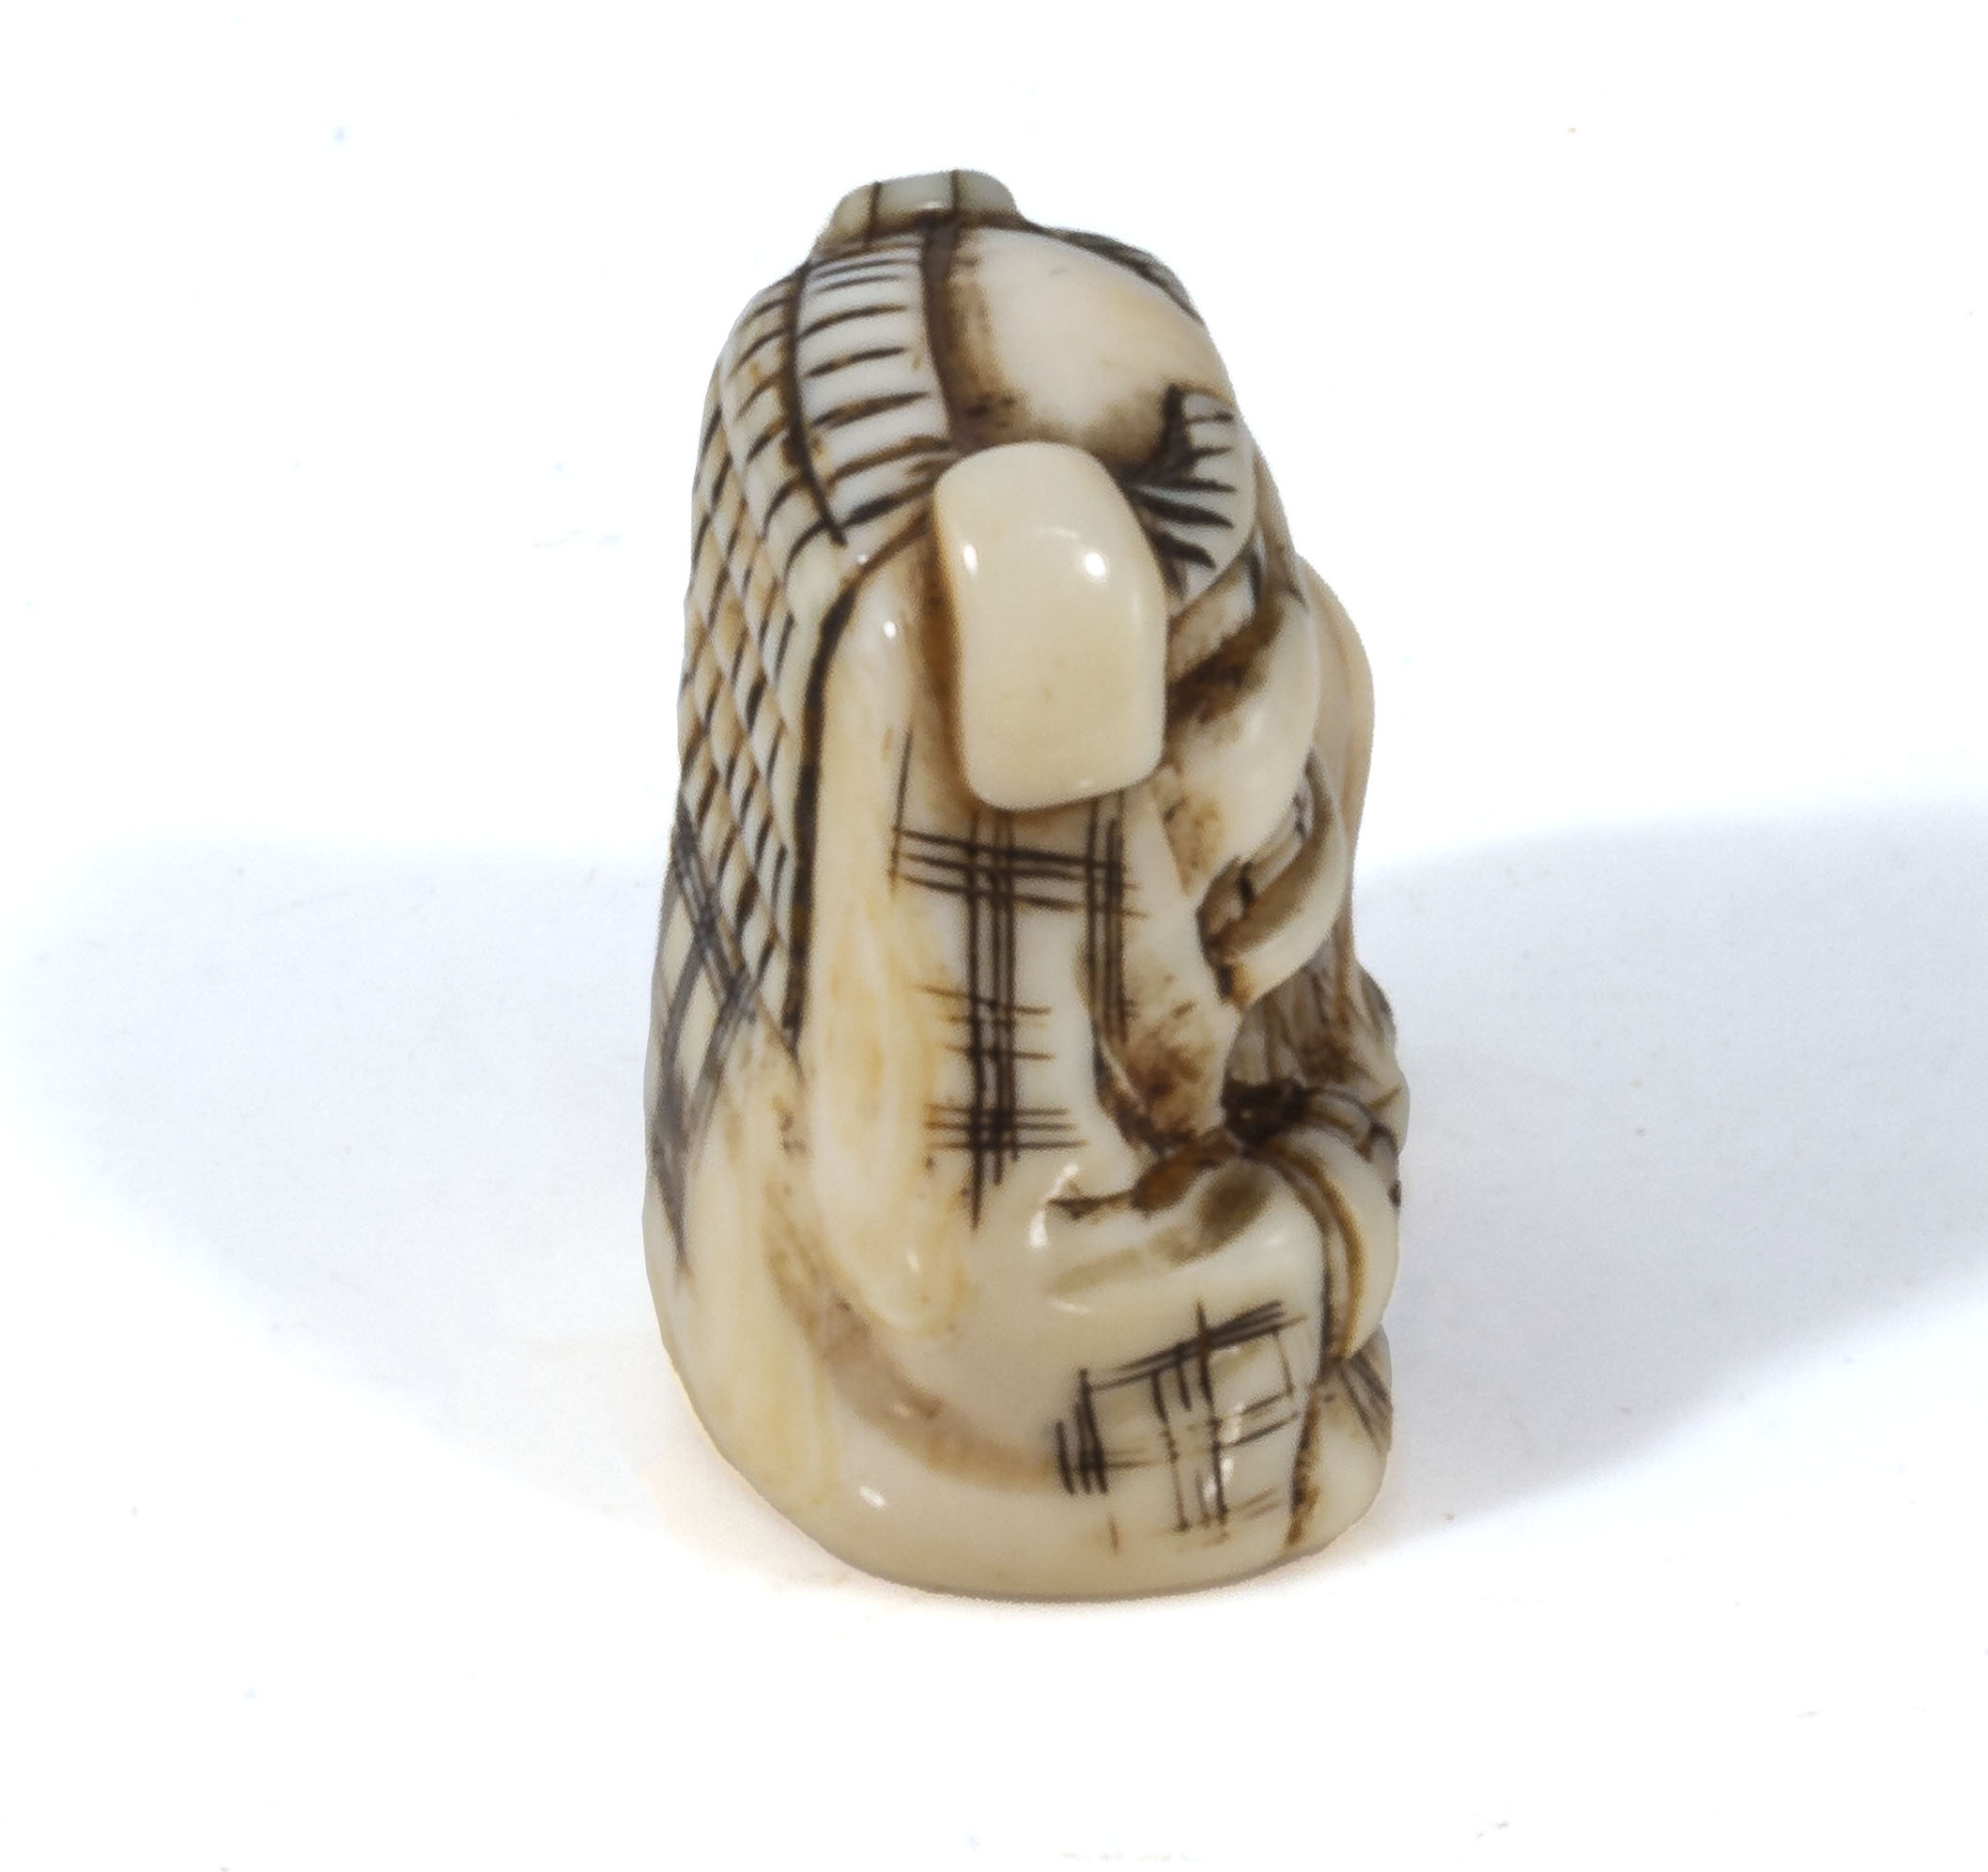 An antique Japanese ivory netsuke meiji period, depicting a boy dressed in a dragon outfit, with - Image 5 of 5